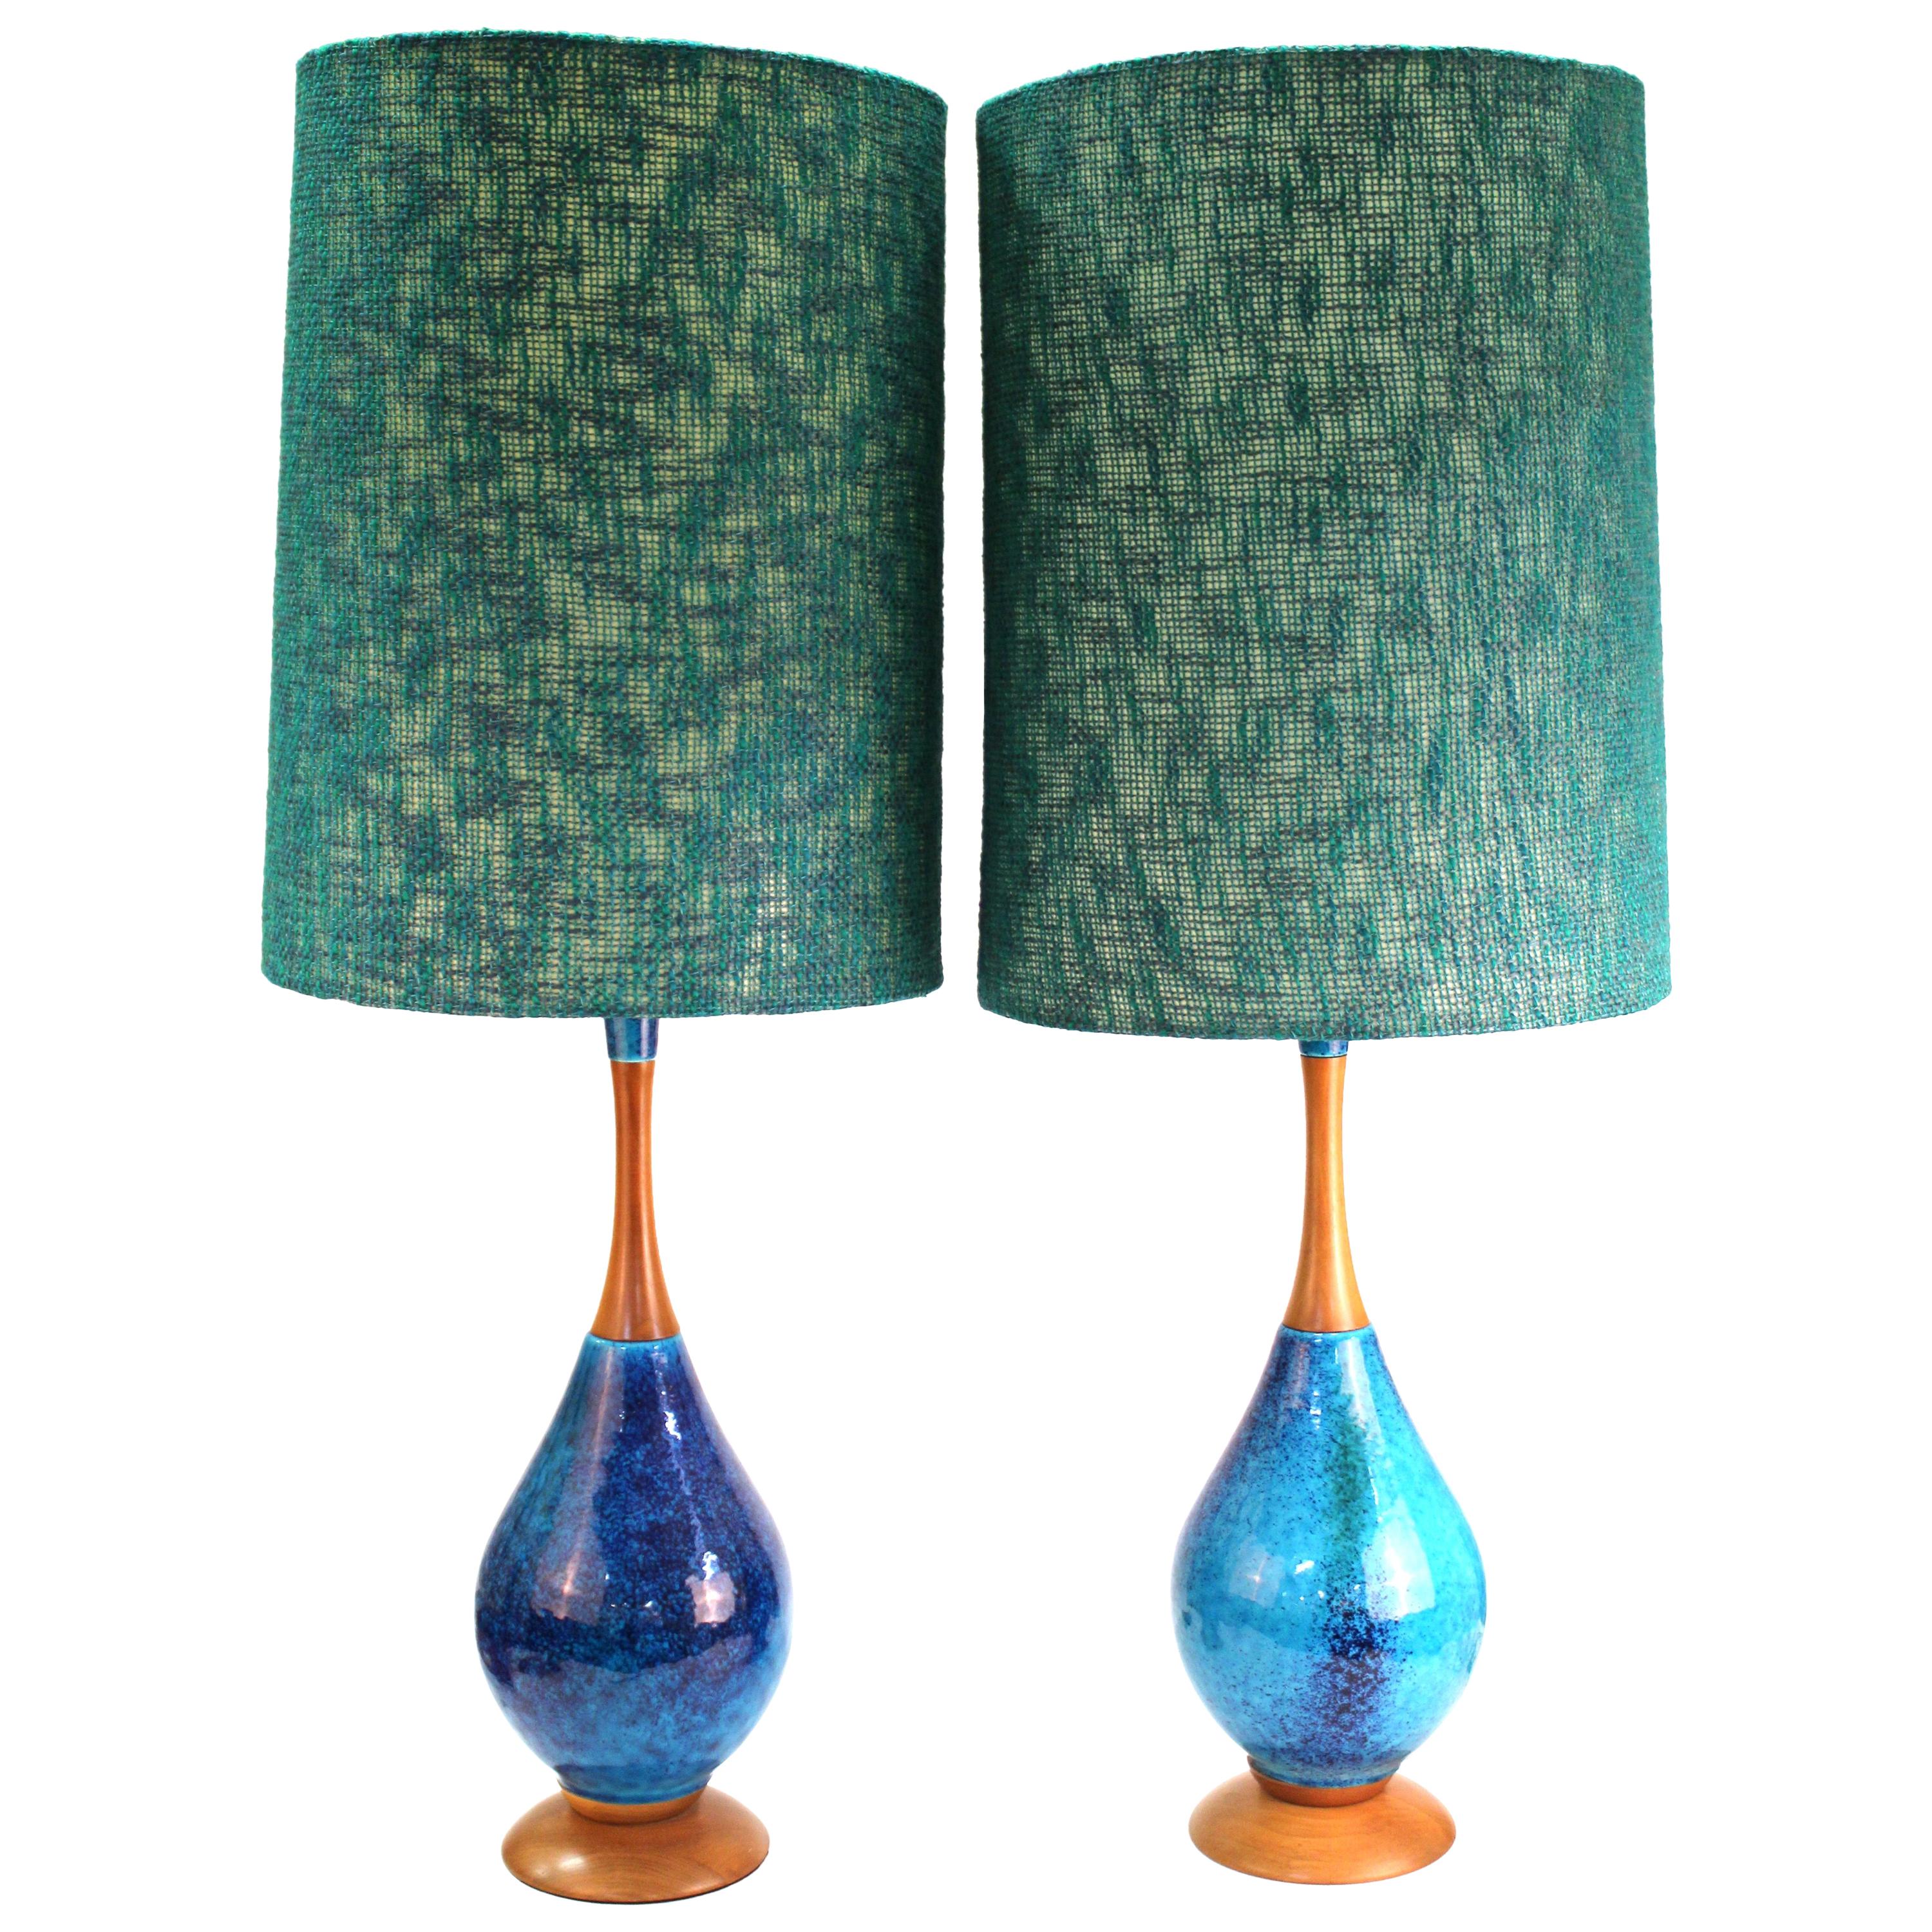 Mid-Century Modern Blue Ceramic and Teak Table Lamps with Fabric Shades